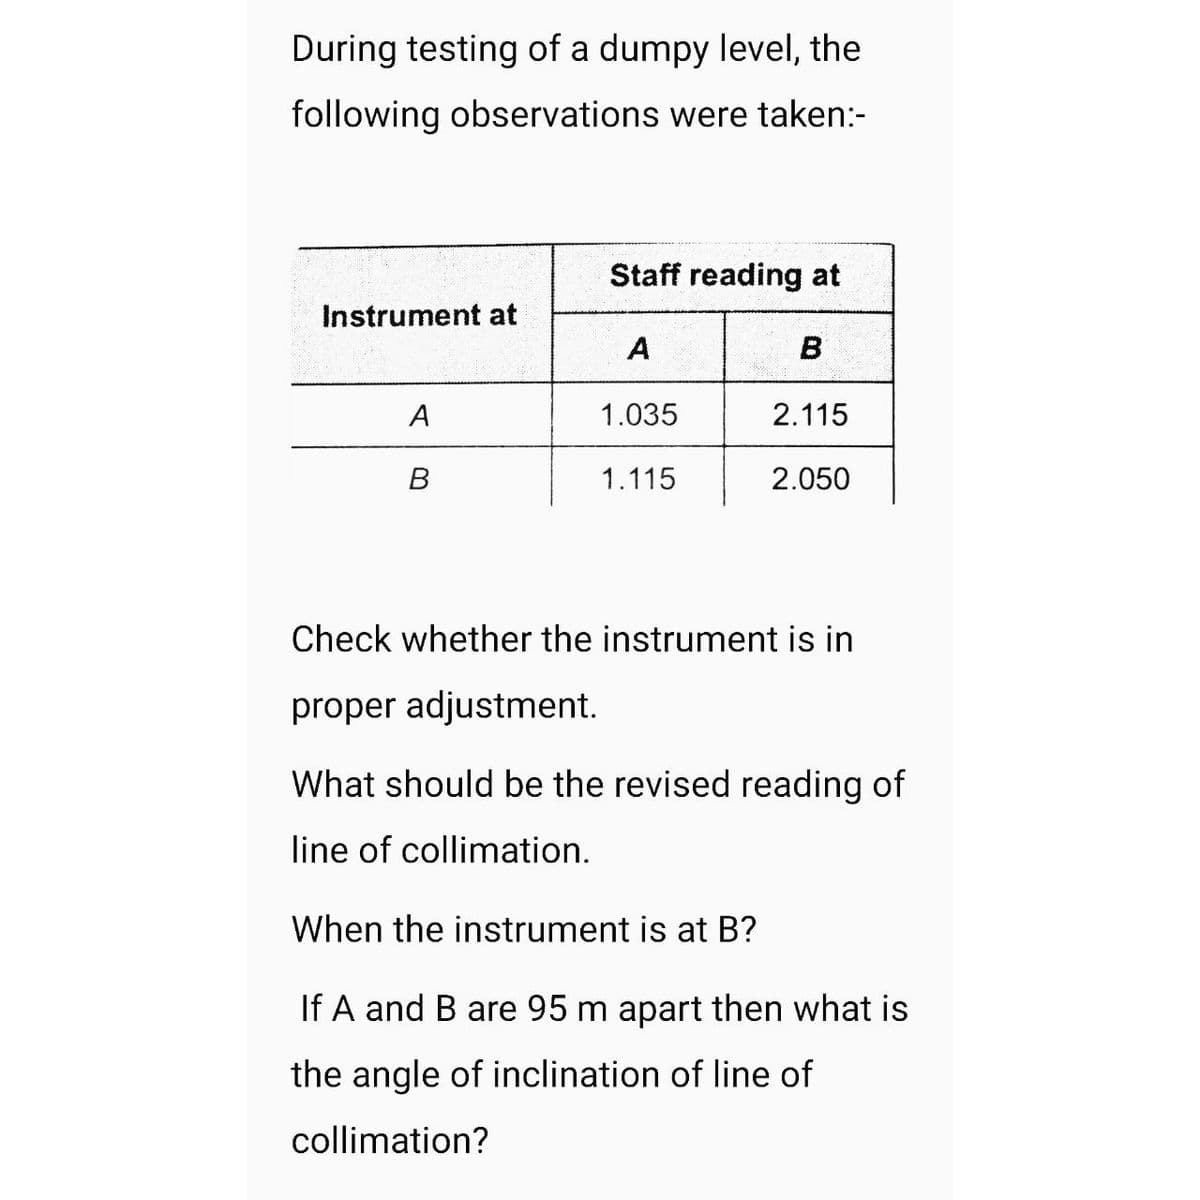 During testing of a dumpy level, the
following observations were taken:-
Instrument at
A
B
Staff reading at
A
1.035
1.115
B
2.115
2.050
Check whether the instrument is in
proper adjustment.
What should be the revised reading of
line of collimation.
When the instrument is at B?
If A and B are 95 m apart then what is
the angle of inclination of line of
collimation?